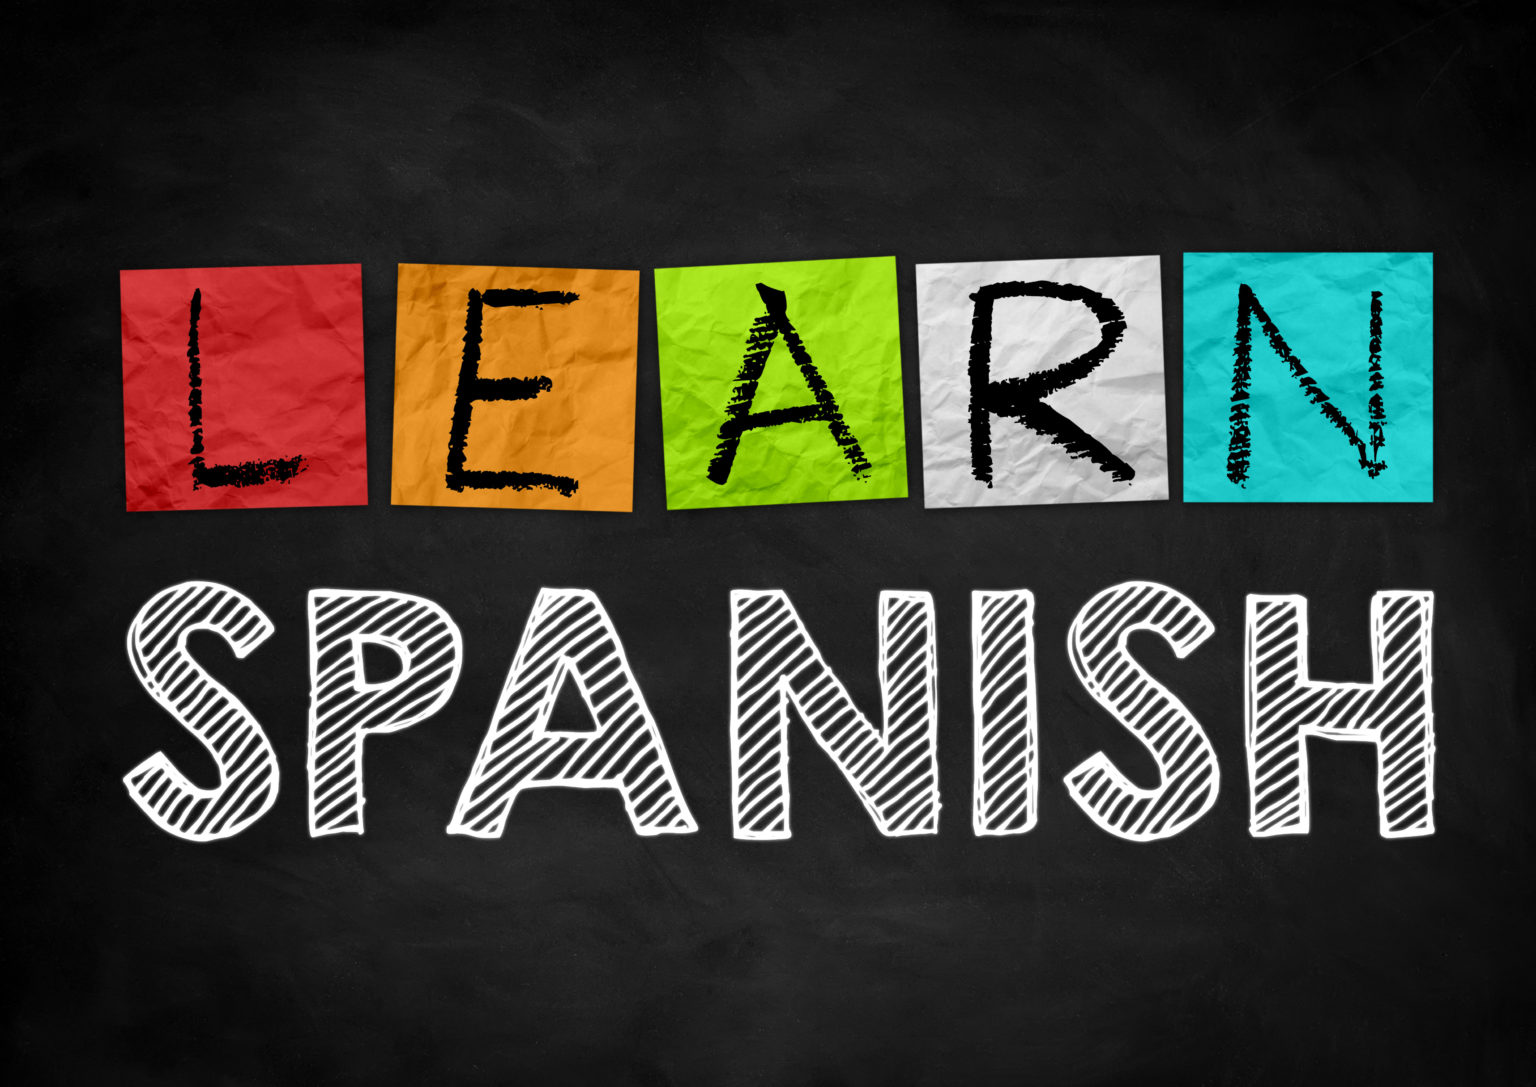 How Long Does It Take To Learn Spanish Fluency Corp